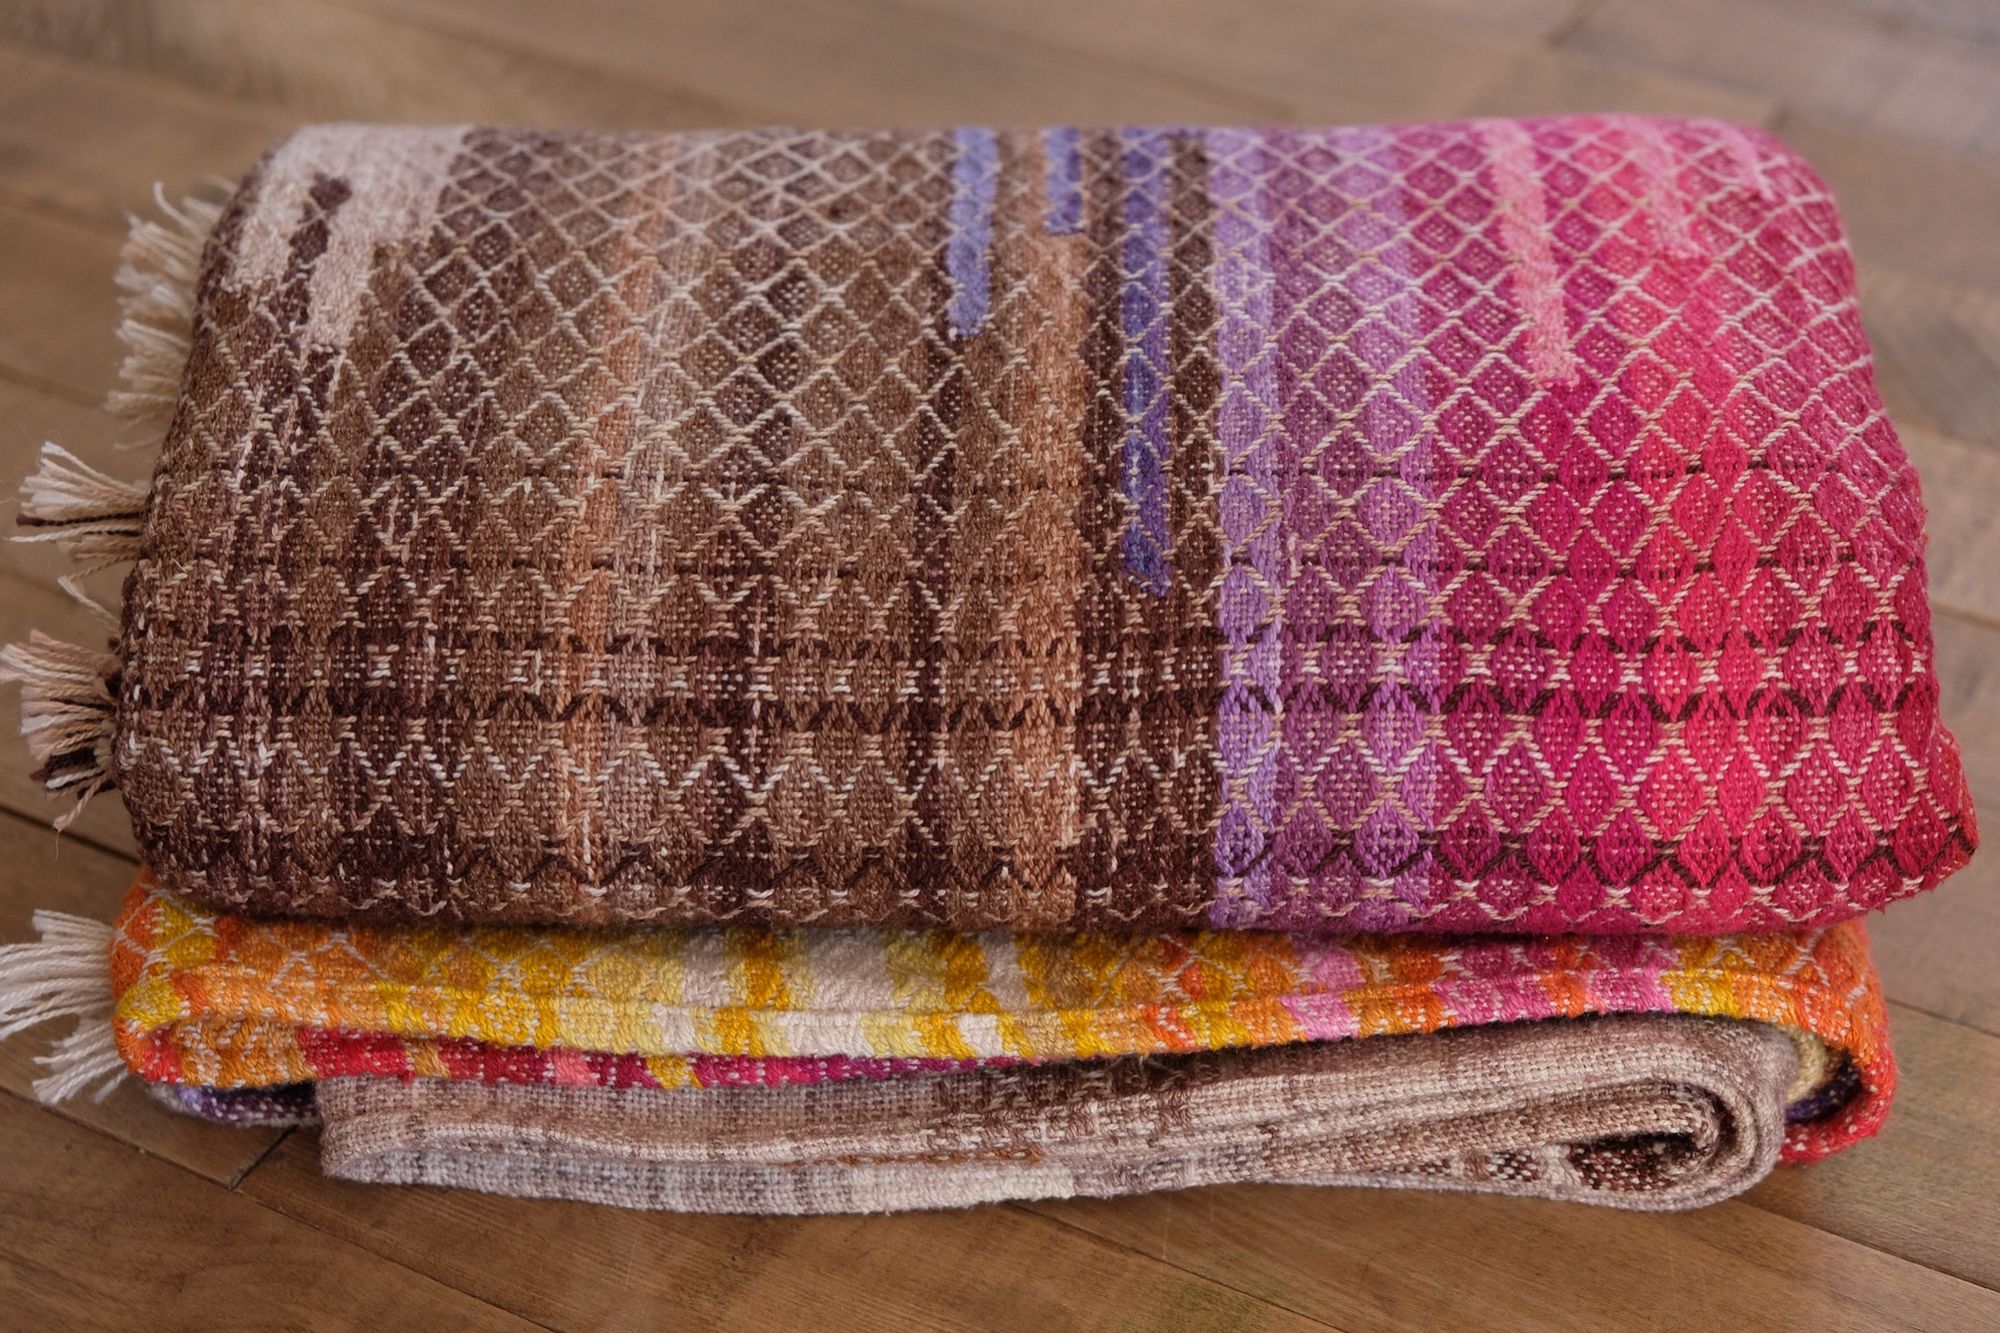 folded Handwoven, highly textures Diamond pattern fabric in every color of the rainbow, with natural browns and tans